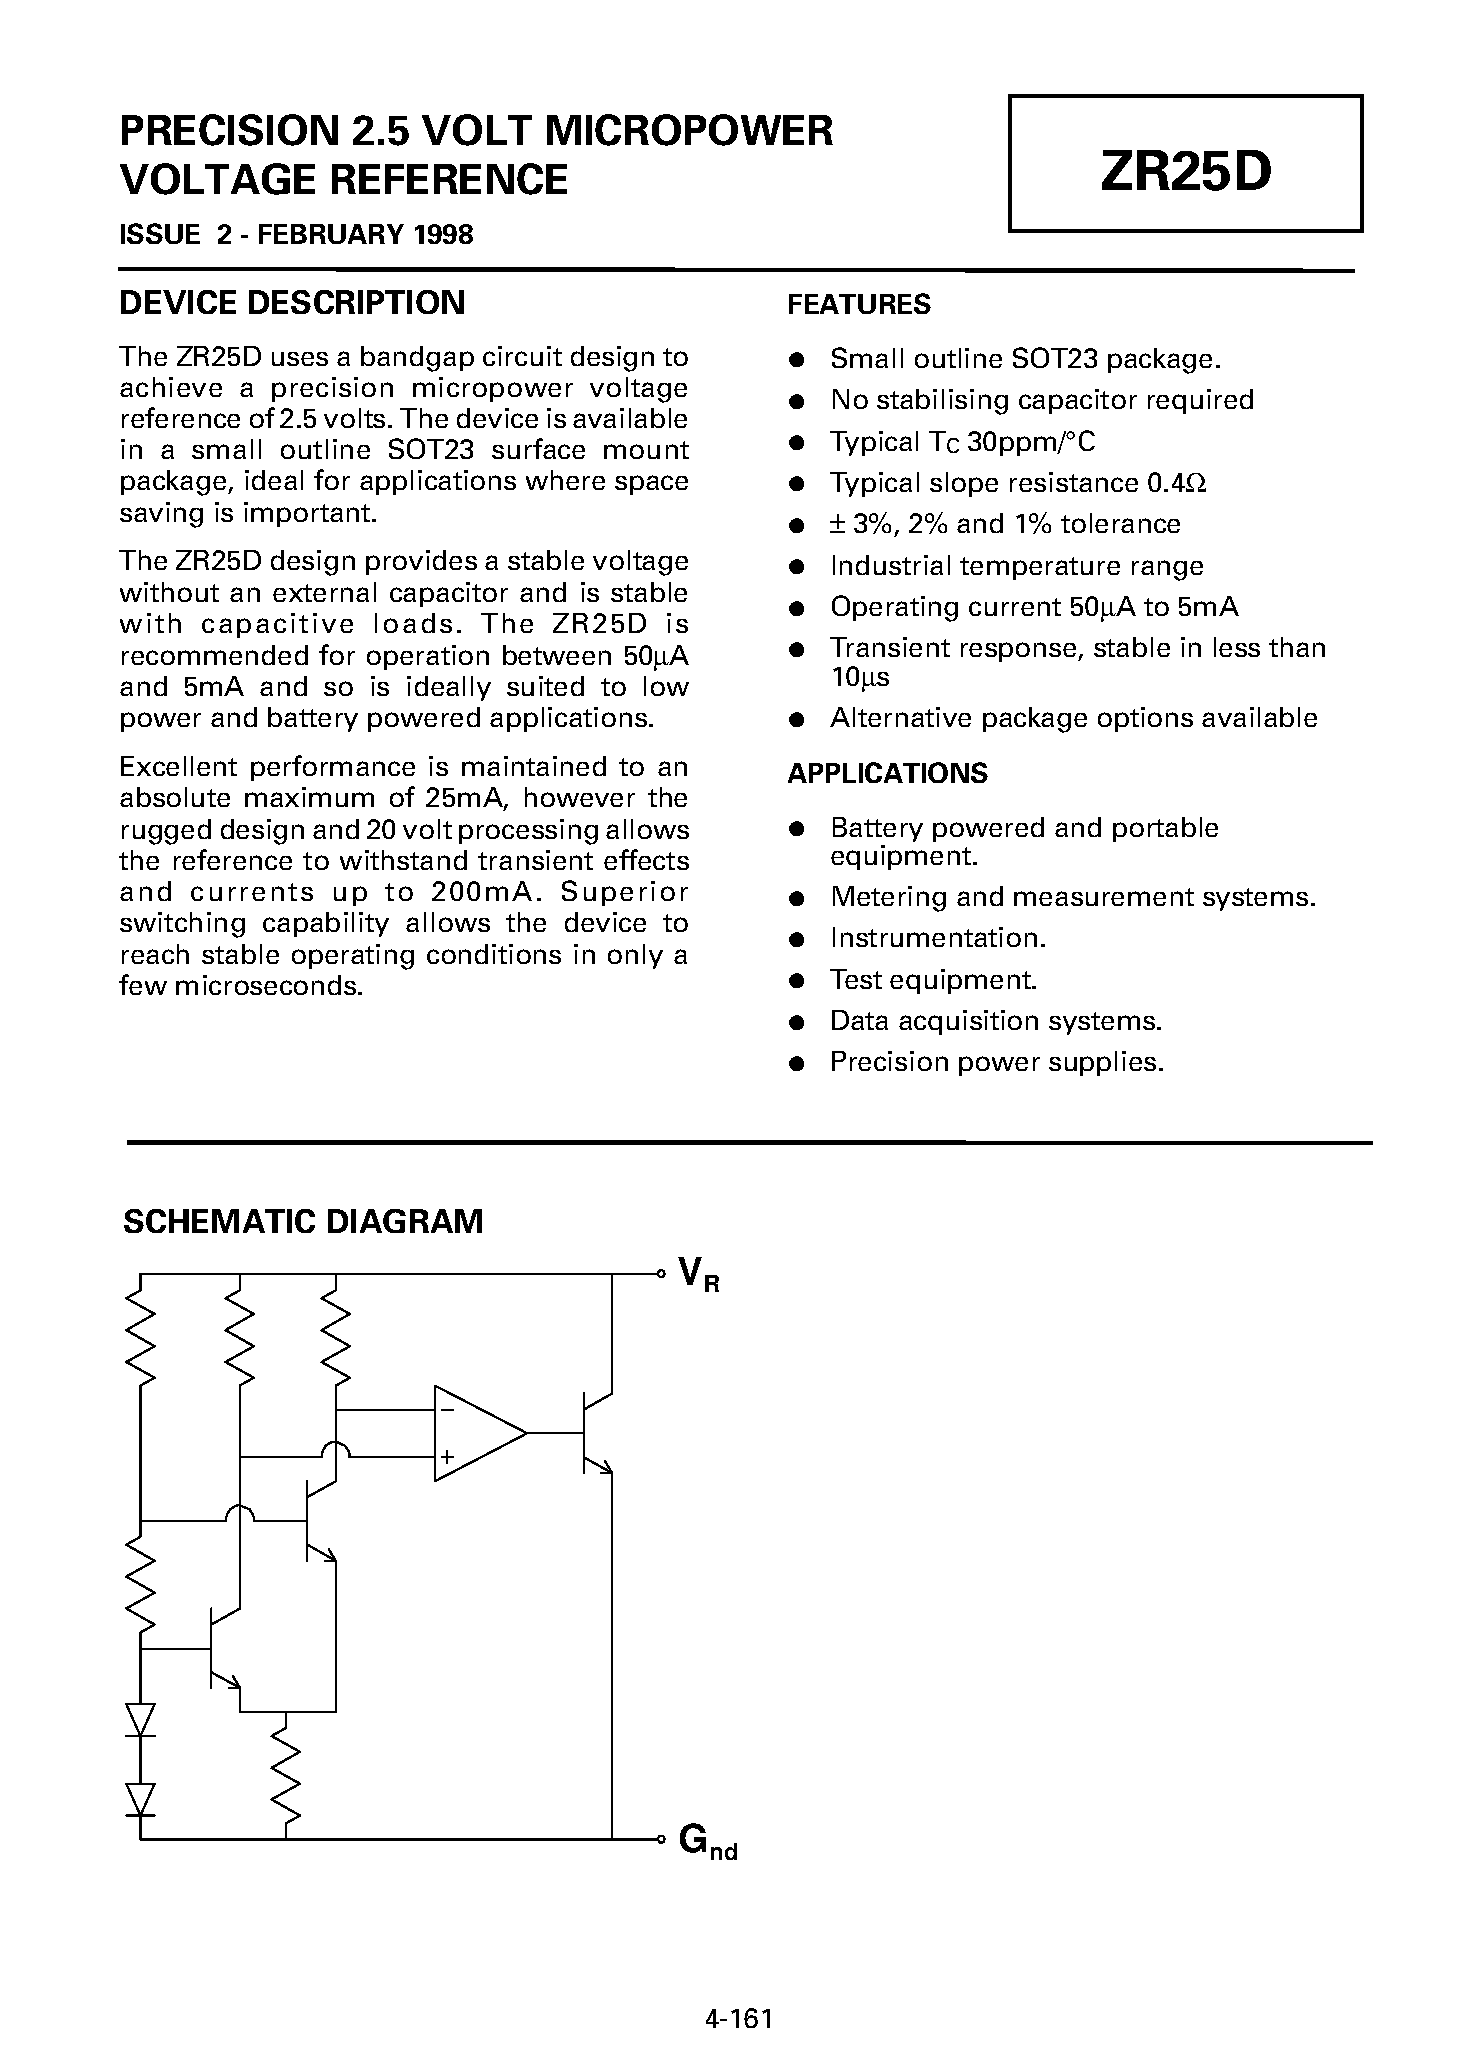 Datasheet ZR25D - PRECISION 2.5 VOLT MICROPOWER VOLTAGE REFERENCE page 1